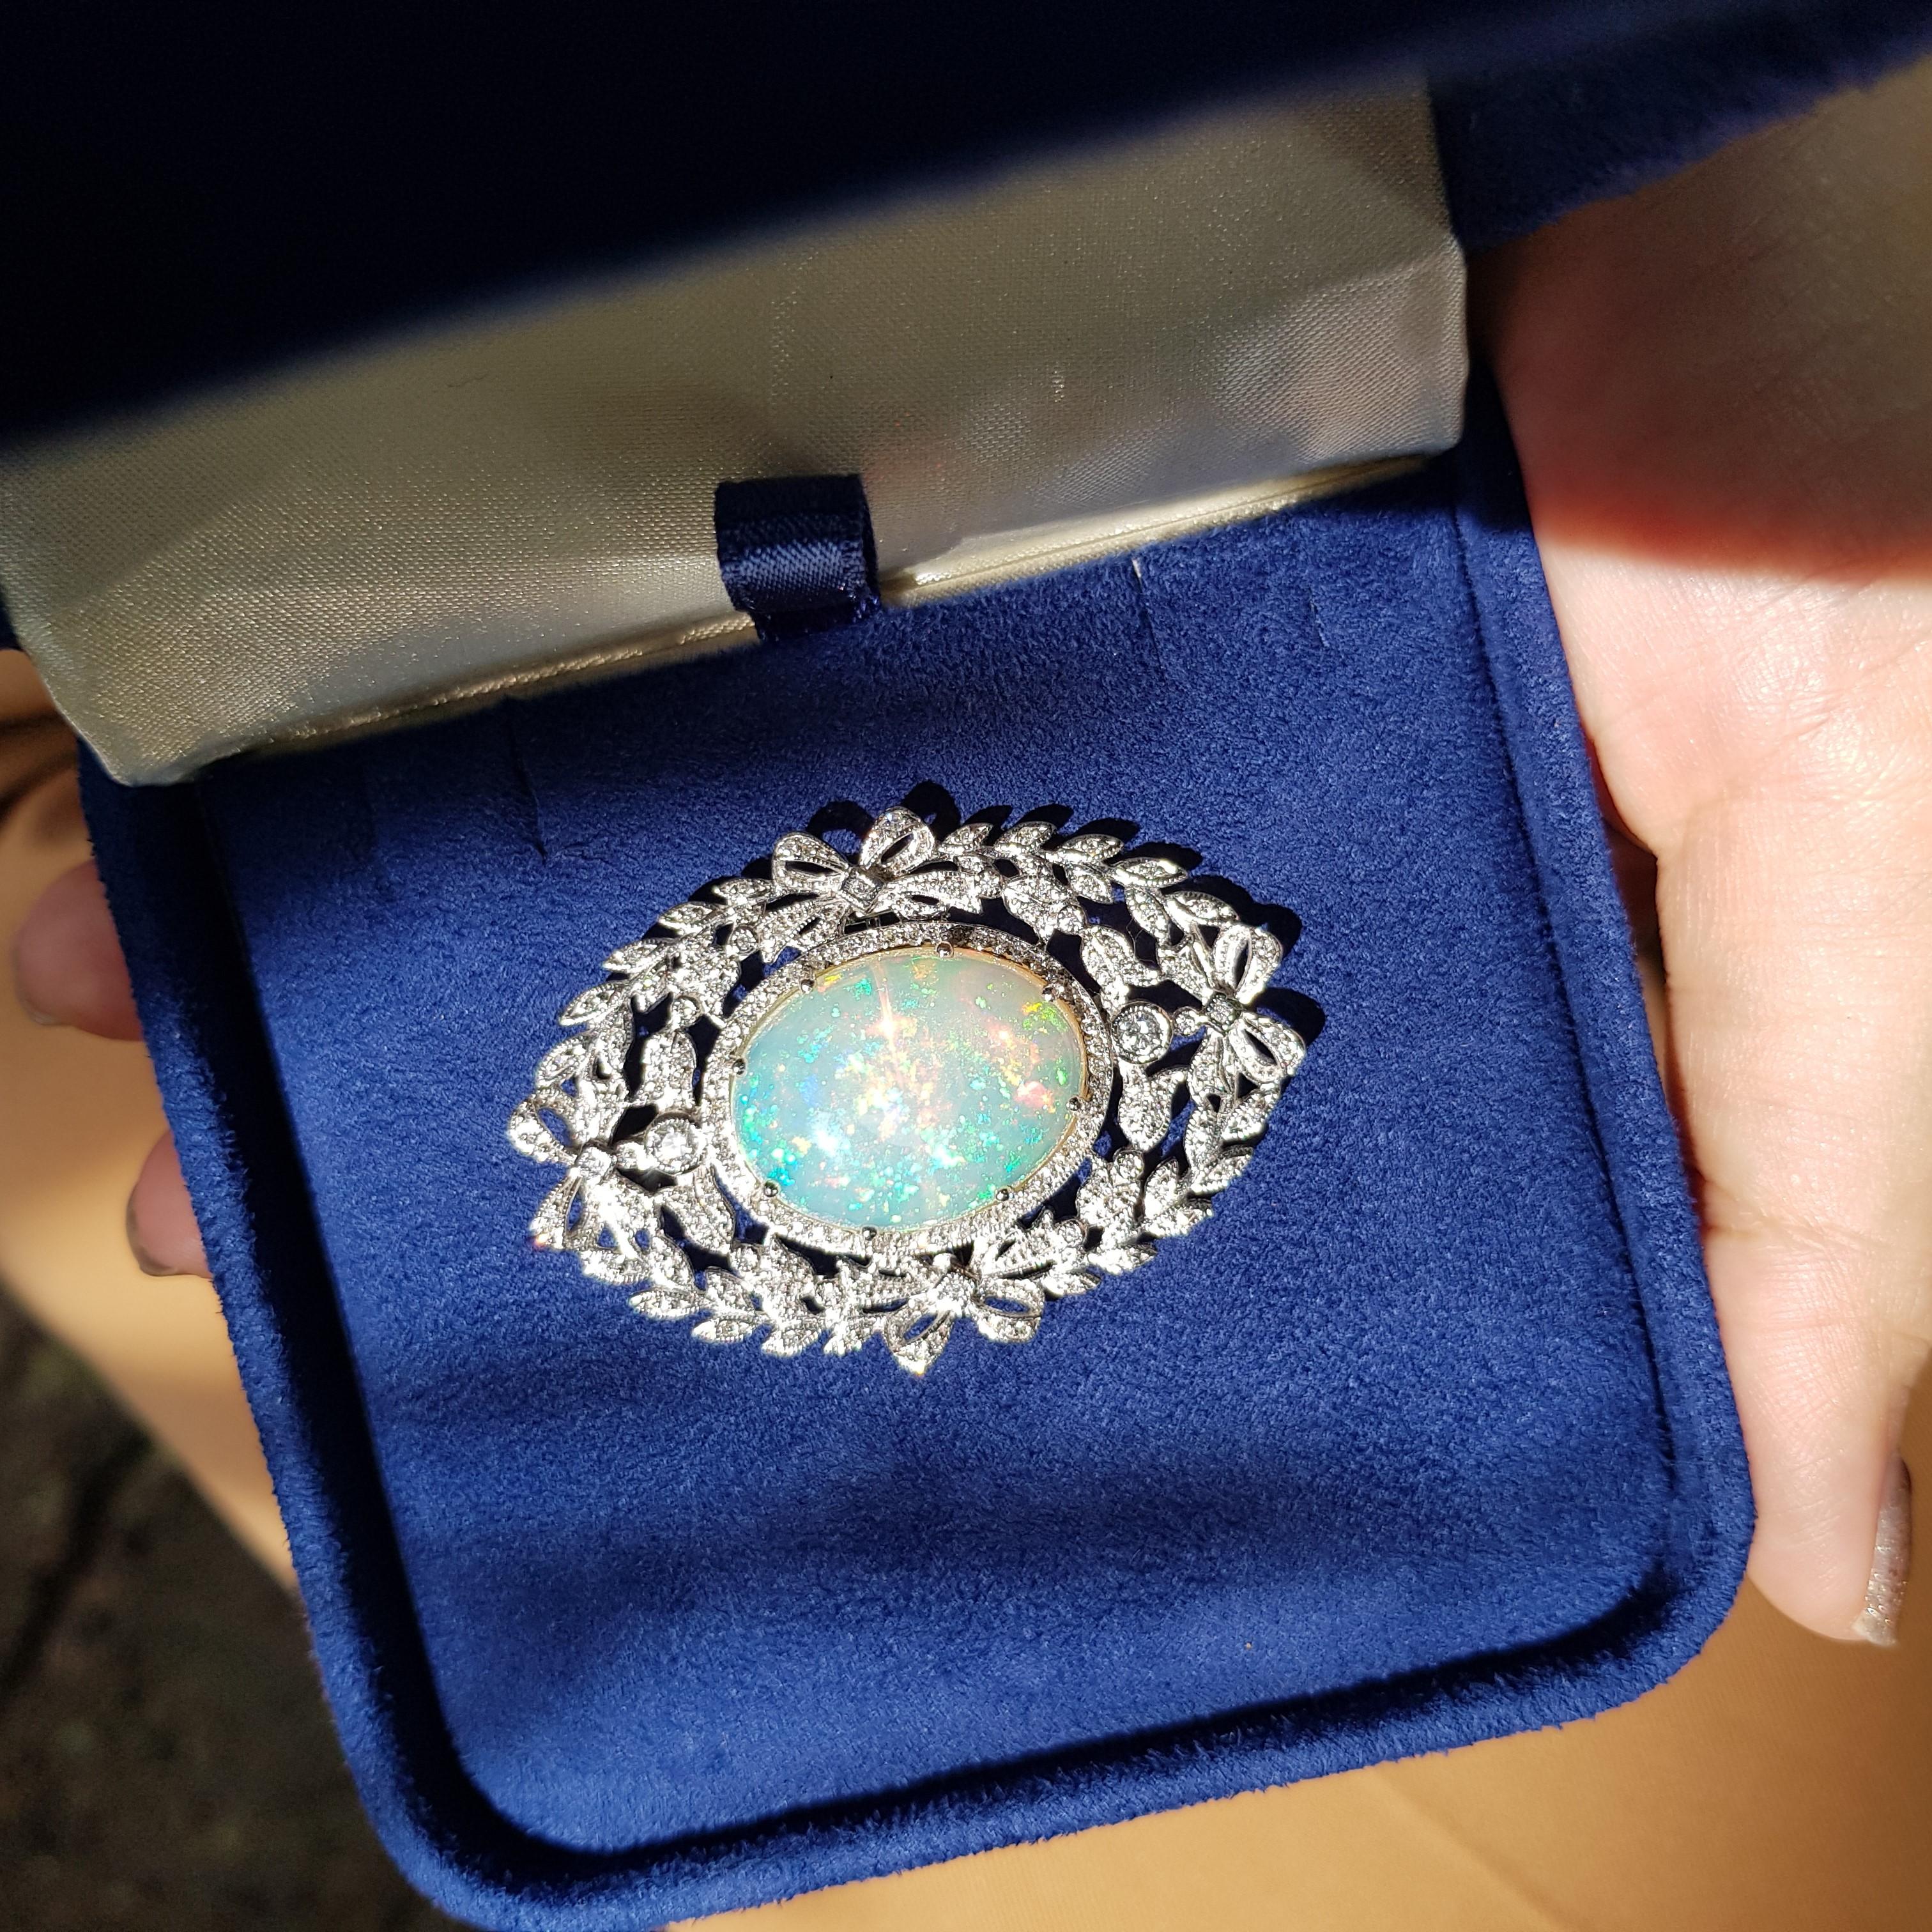 Edwardian Style 13.43 Ct. Ethiopian Opal and Diamond Brooch in 18K White Gold 3